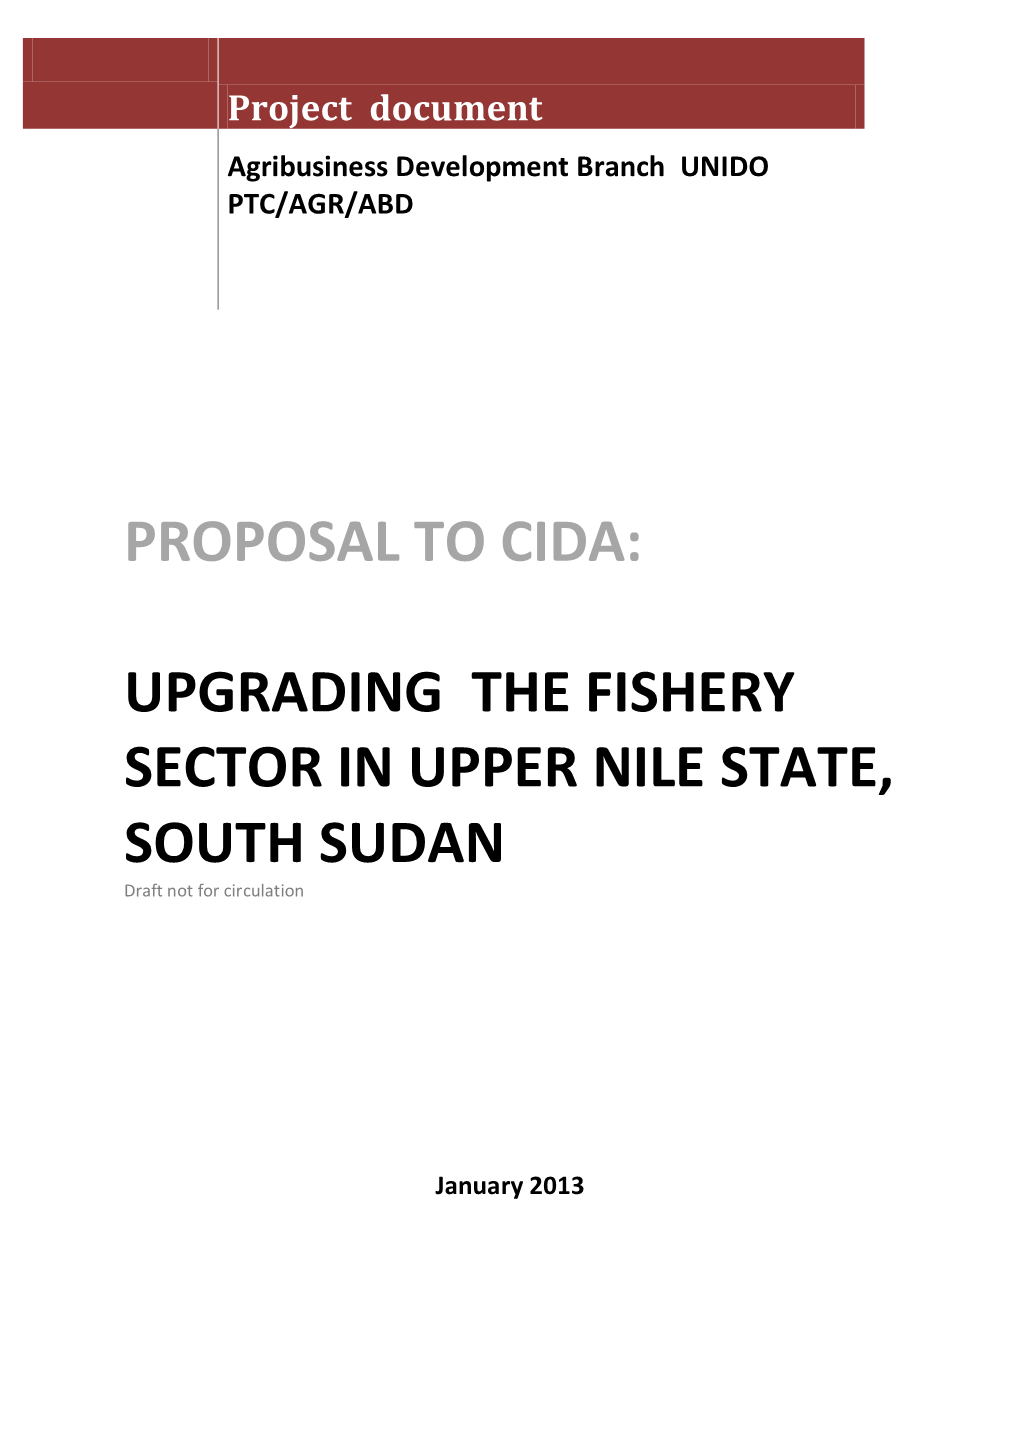 Background Report on the Fishery Sector in Upper Nile State, South